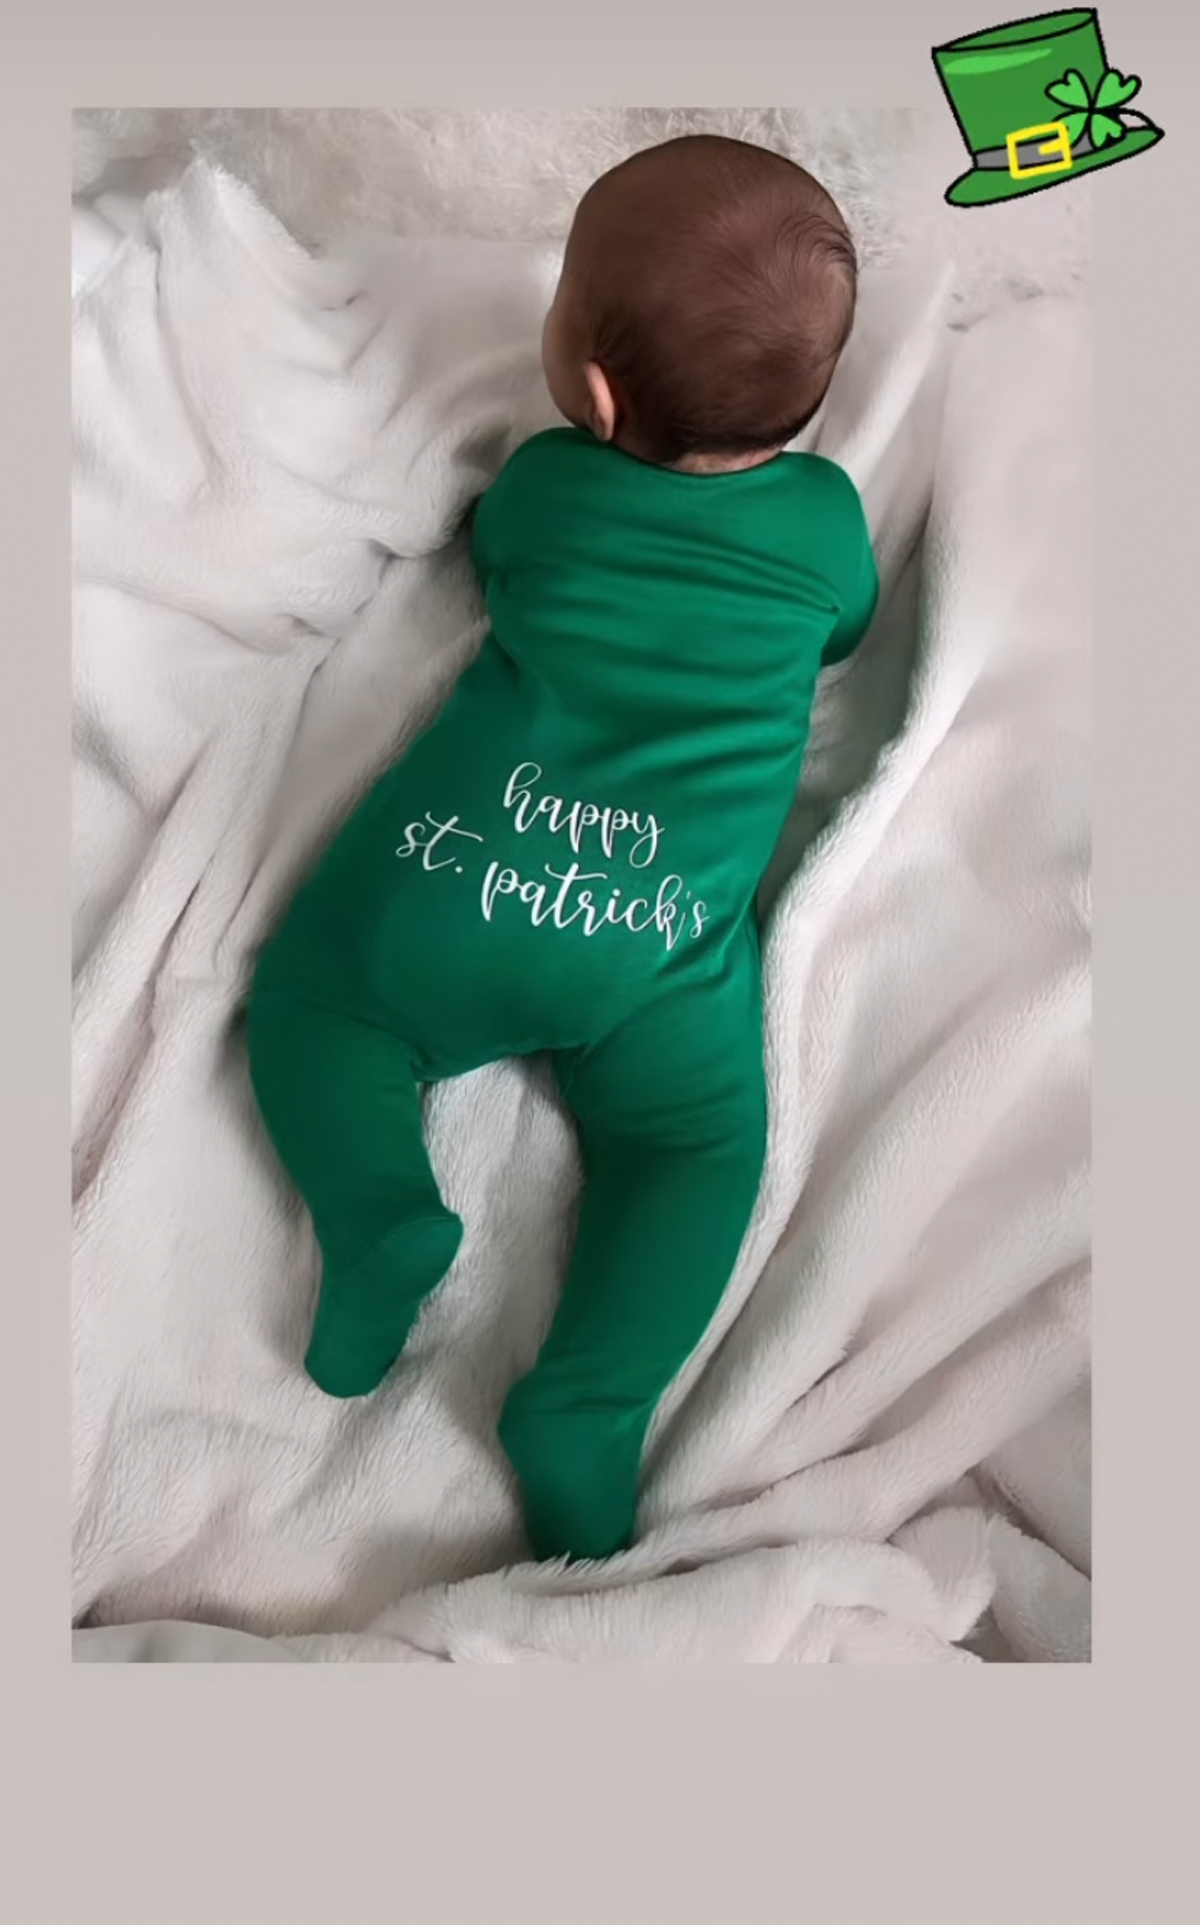 Tristan Thompson’s Baby Momma Maralee Nichols Shares Another Rare Pic Of the Son Theo